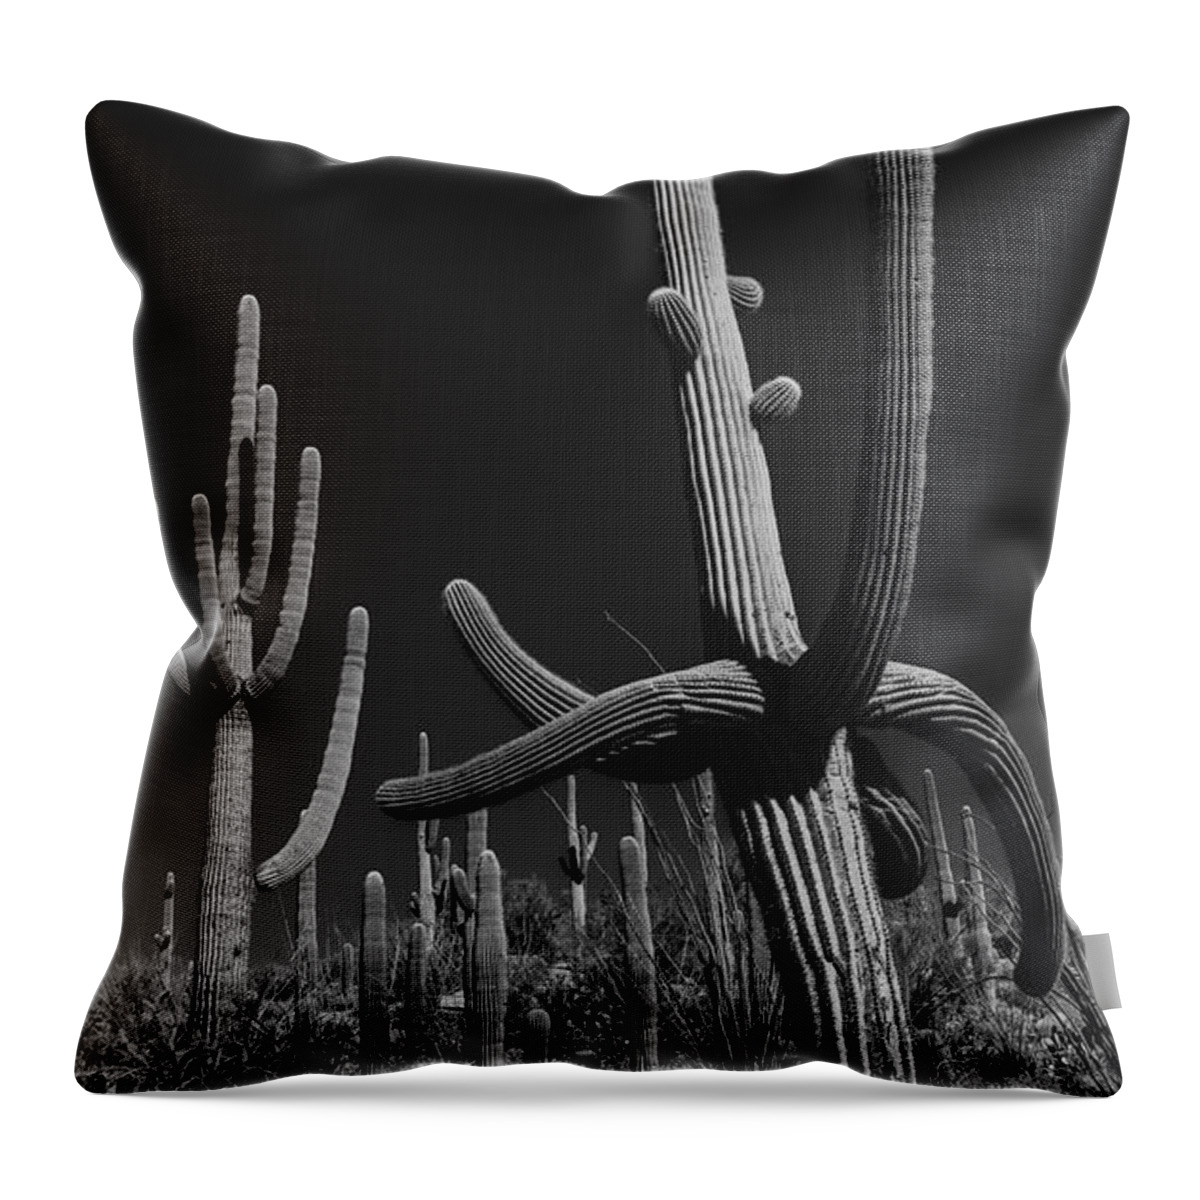 Cactus Throw Pillow featuring the photograph Cactus Forest by Seth Betterly